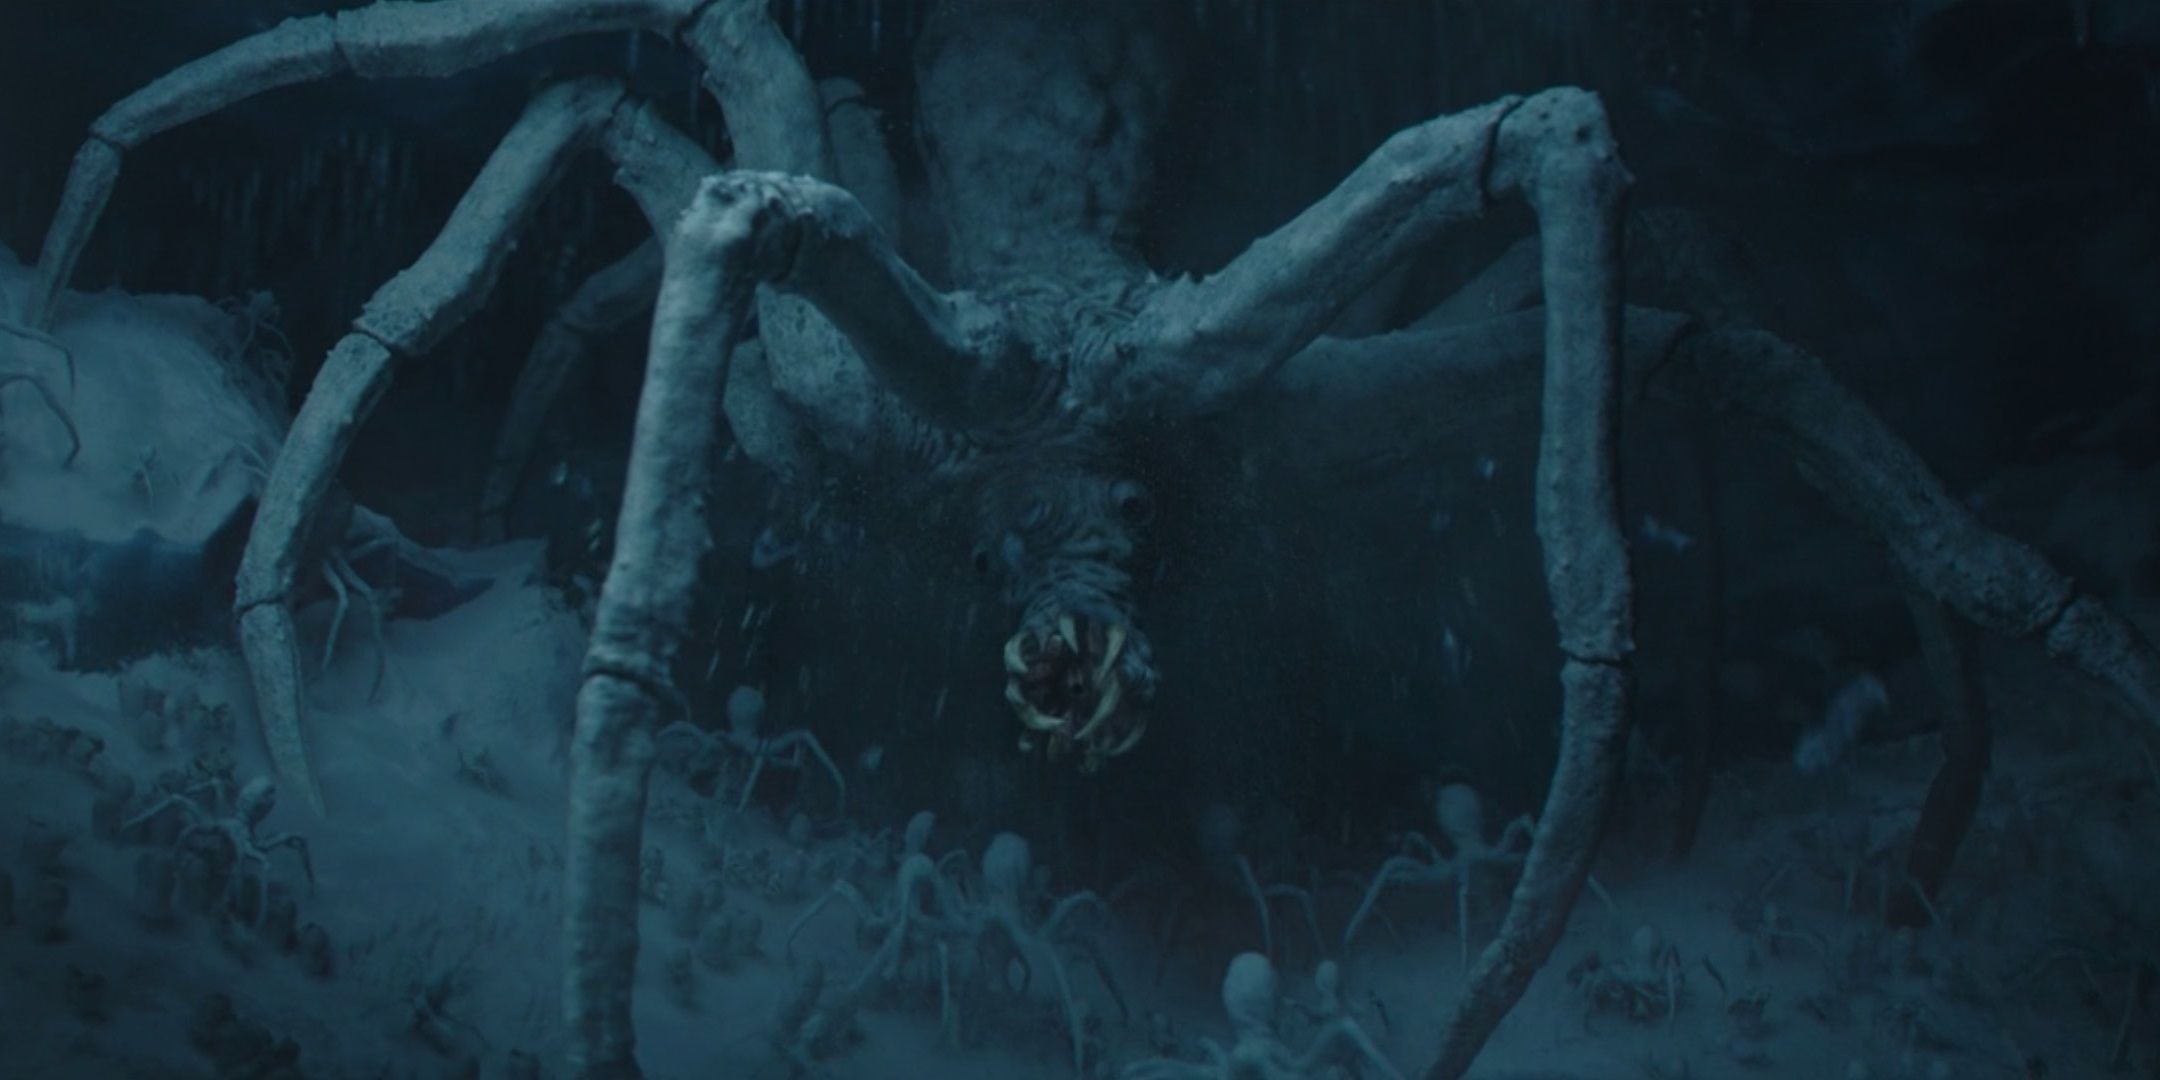 The knobby white ice spiders attack Din in The Mandalorian